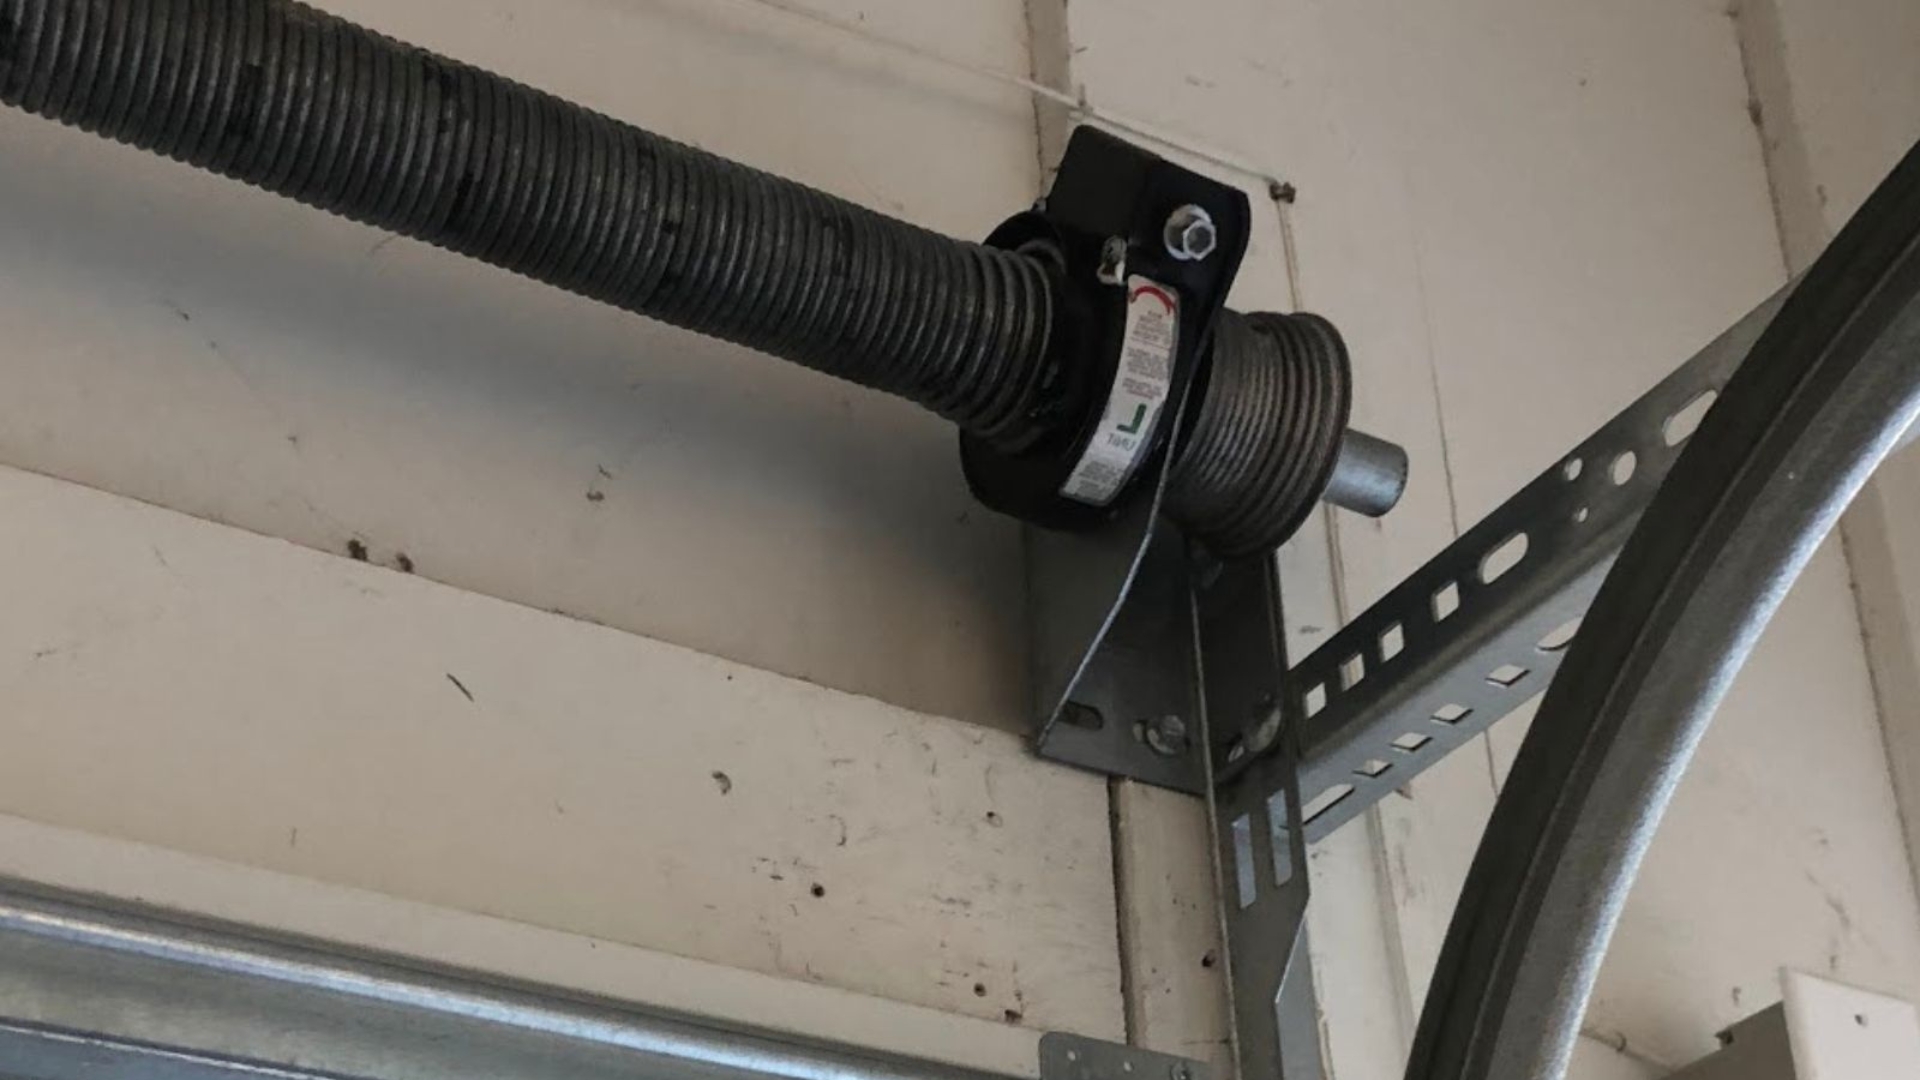 A cable coiled in its drum on the garage door